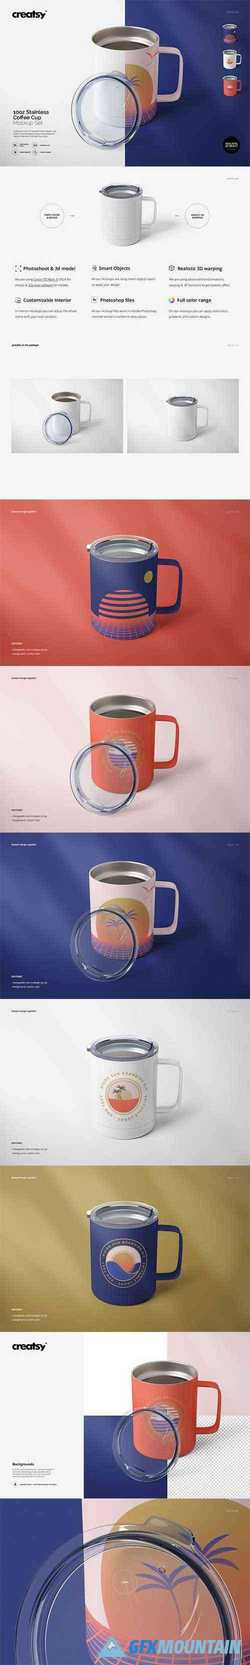 10oz Stainless Coffee Cup Mockup Set 3490965